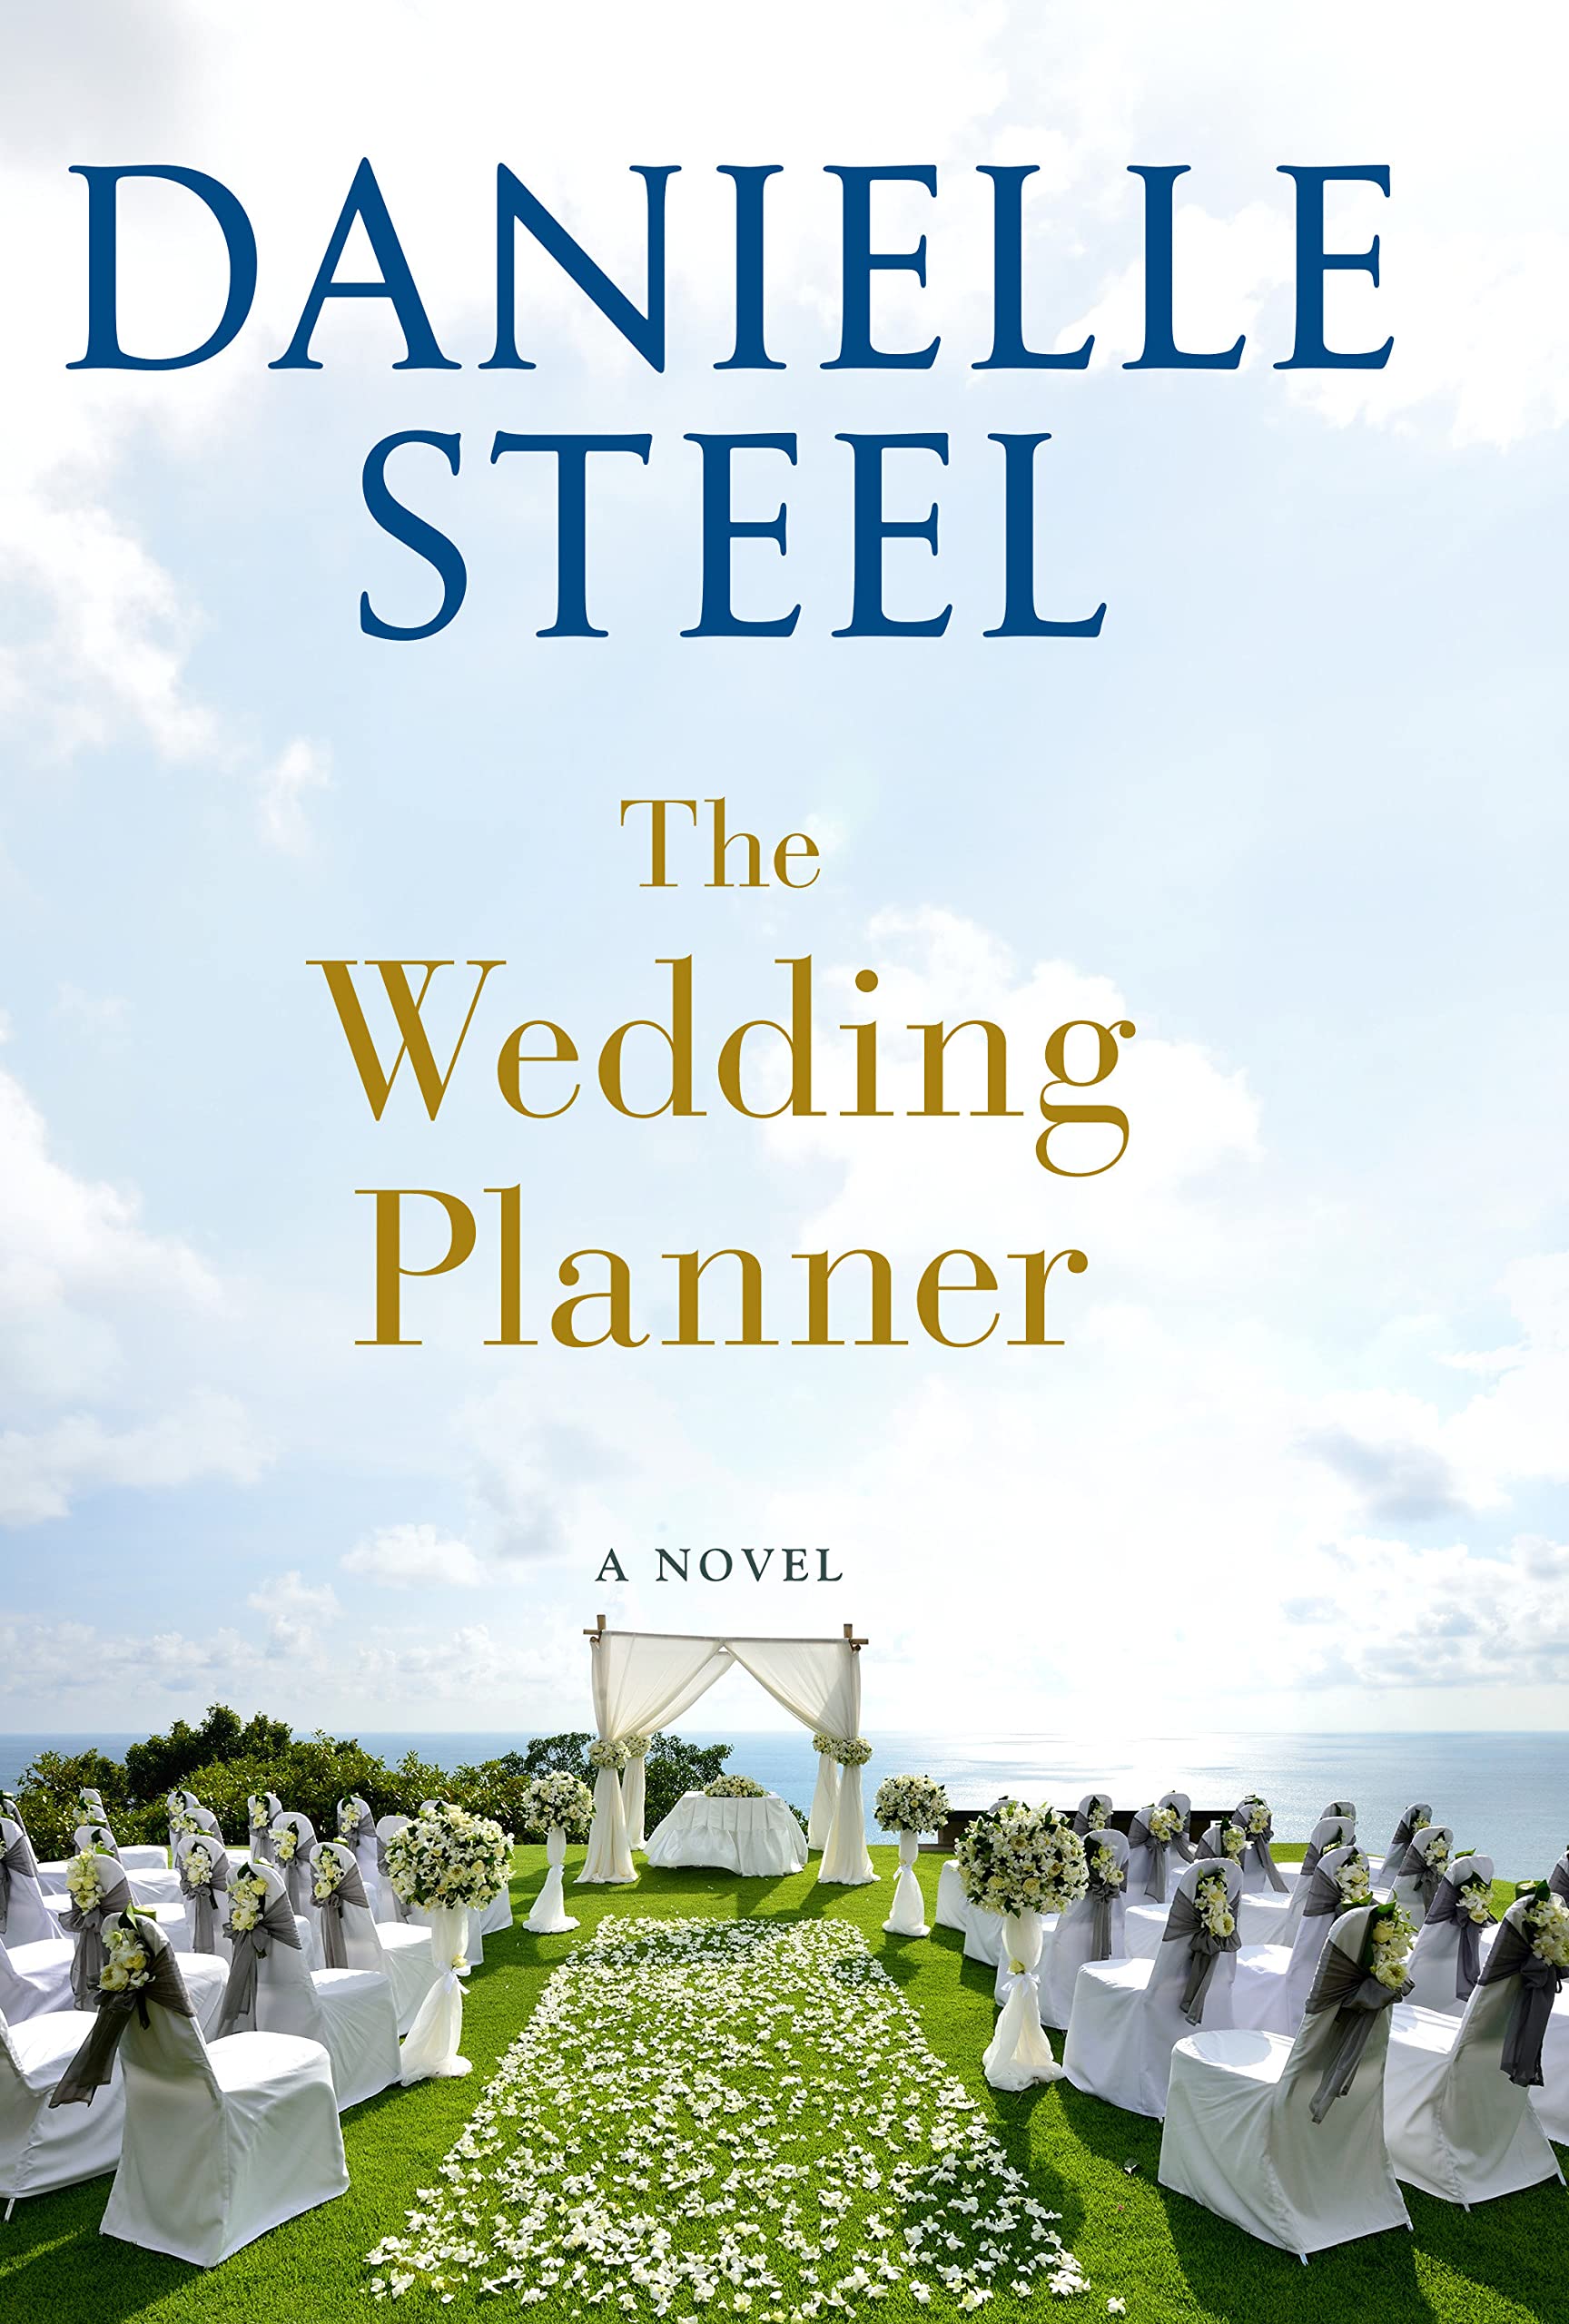 Image for "The Wedding Planner"